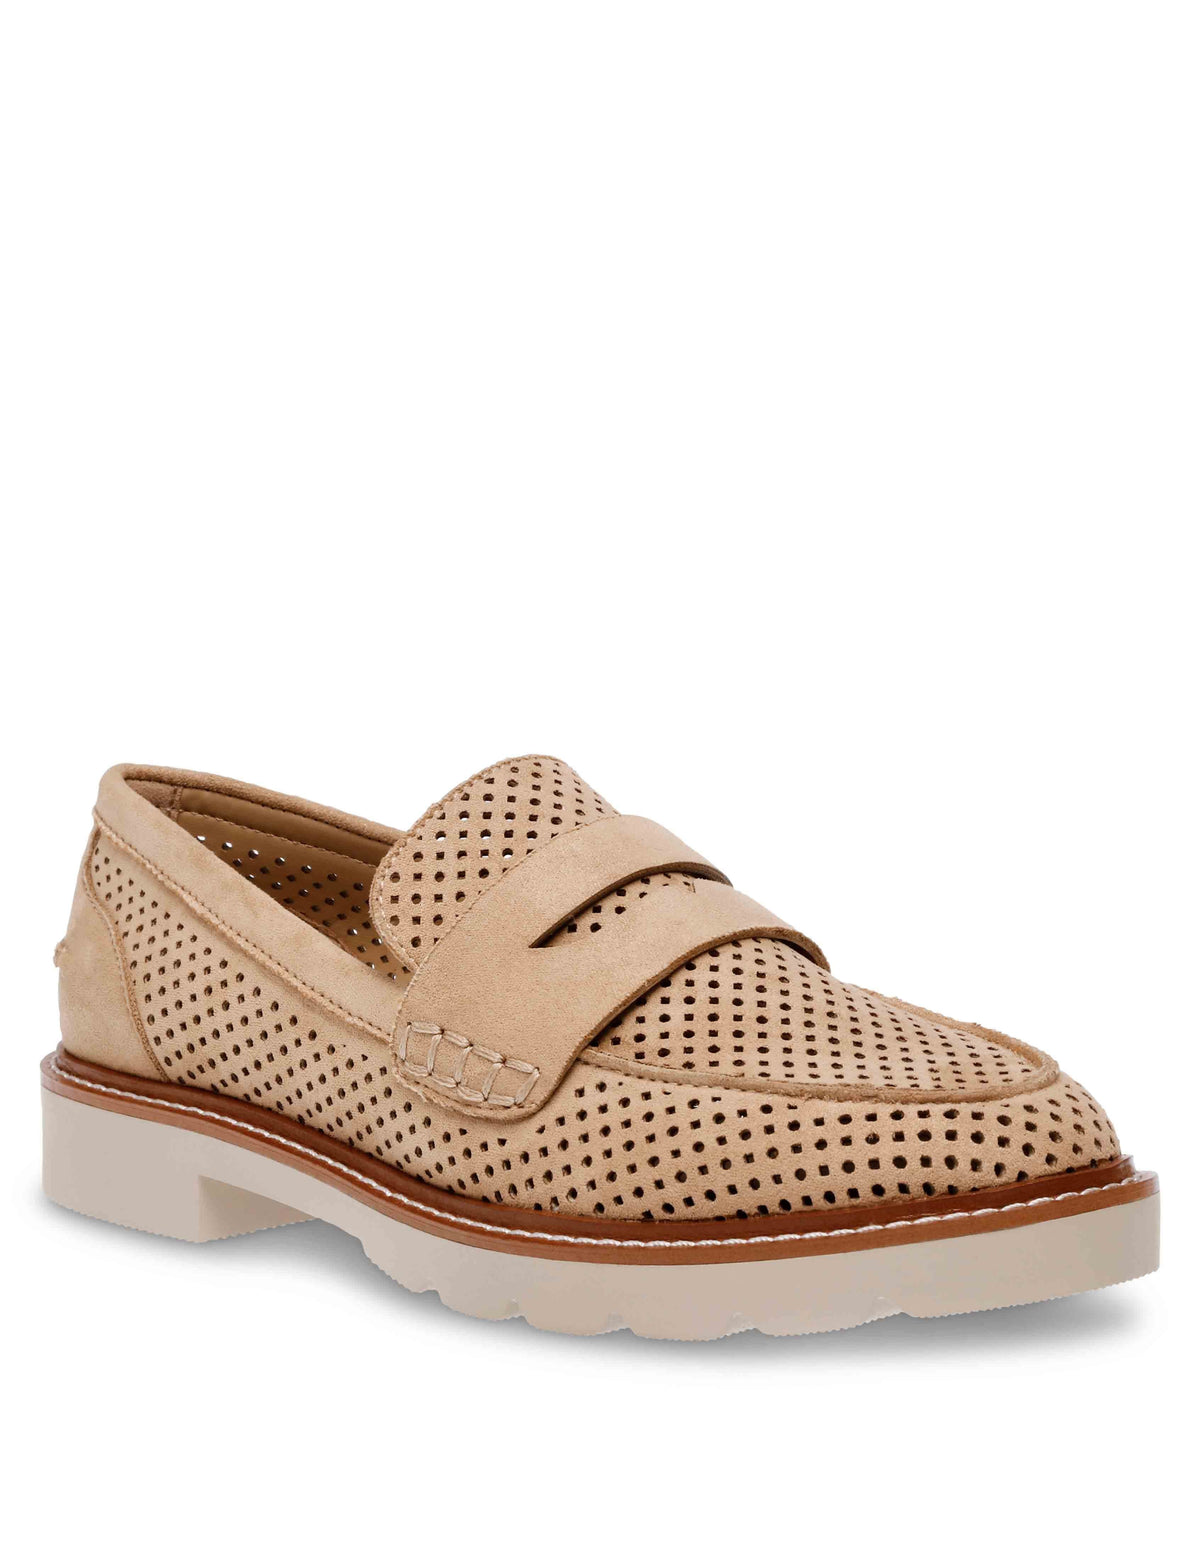 Anne Klein Natural Microsuede Perforated Emmylou Perforated Loafer